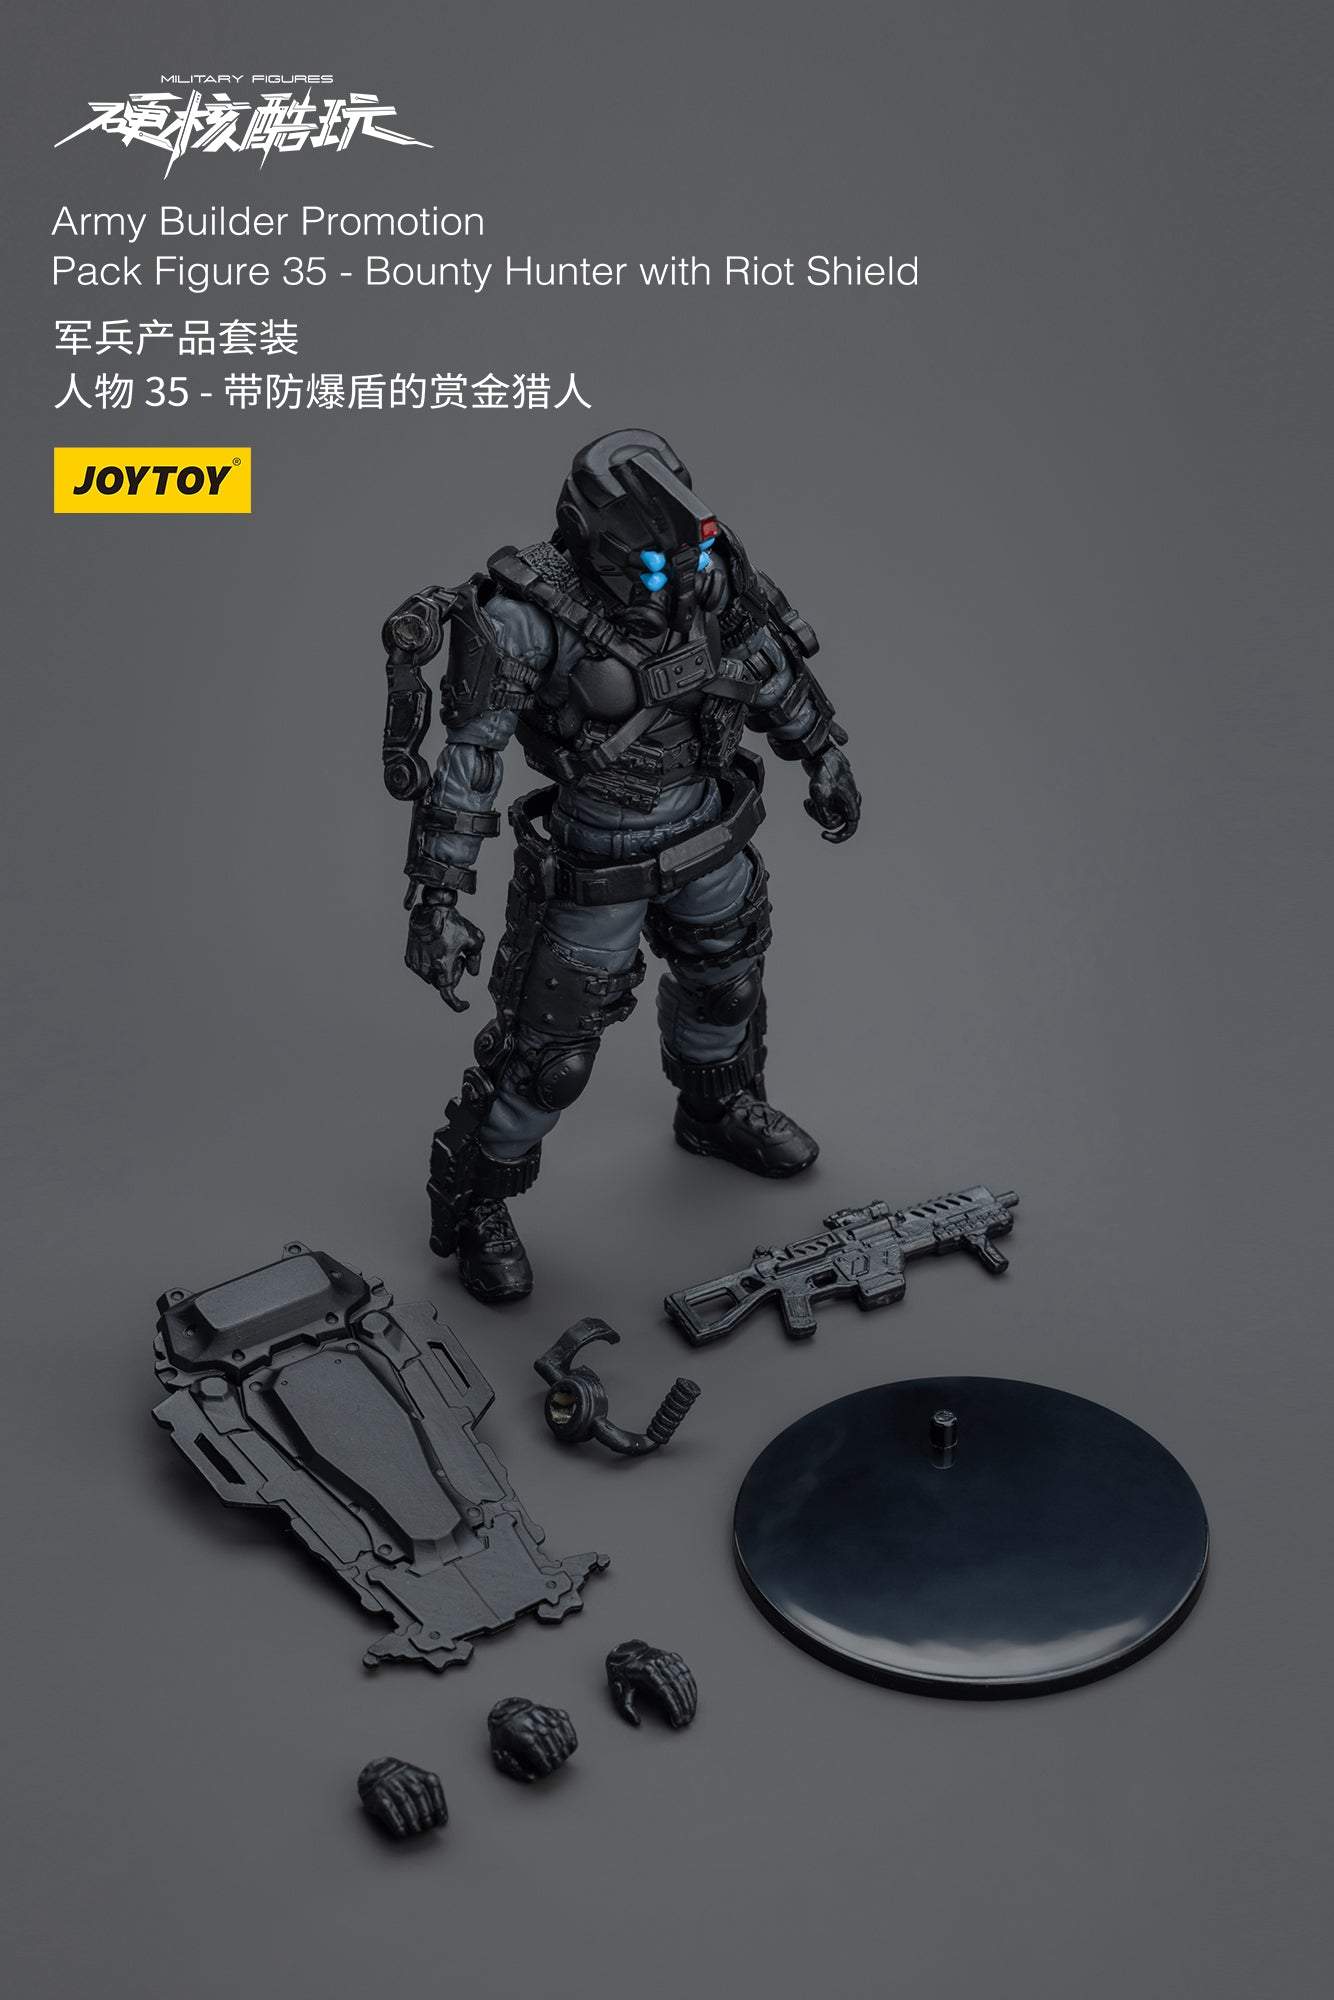 Army Builder Promotion Pack Figure 35 - Bounty Hunter with Riot Shield - Soldiers Action Figure By JOYTOY